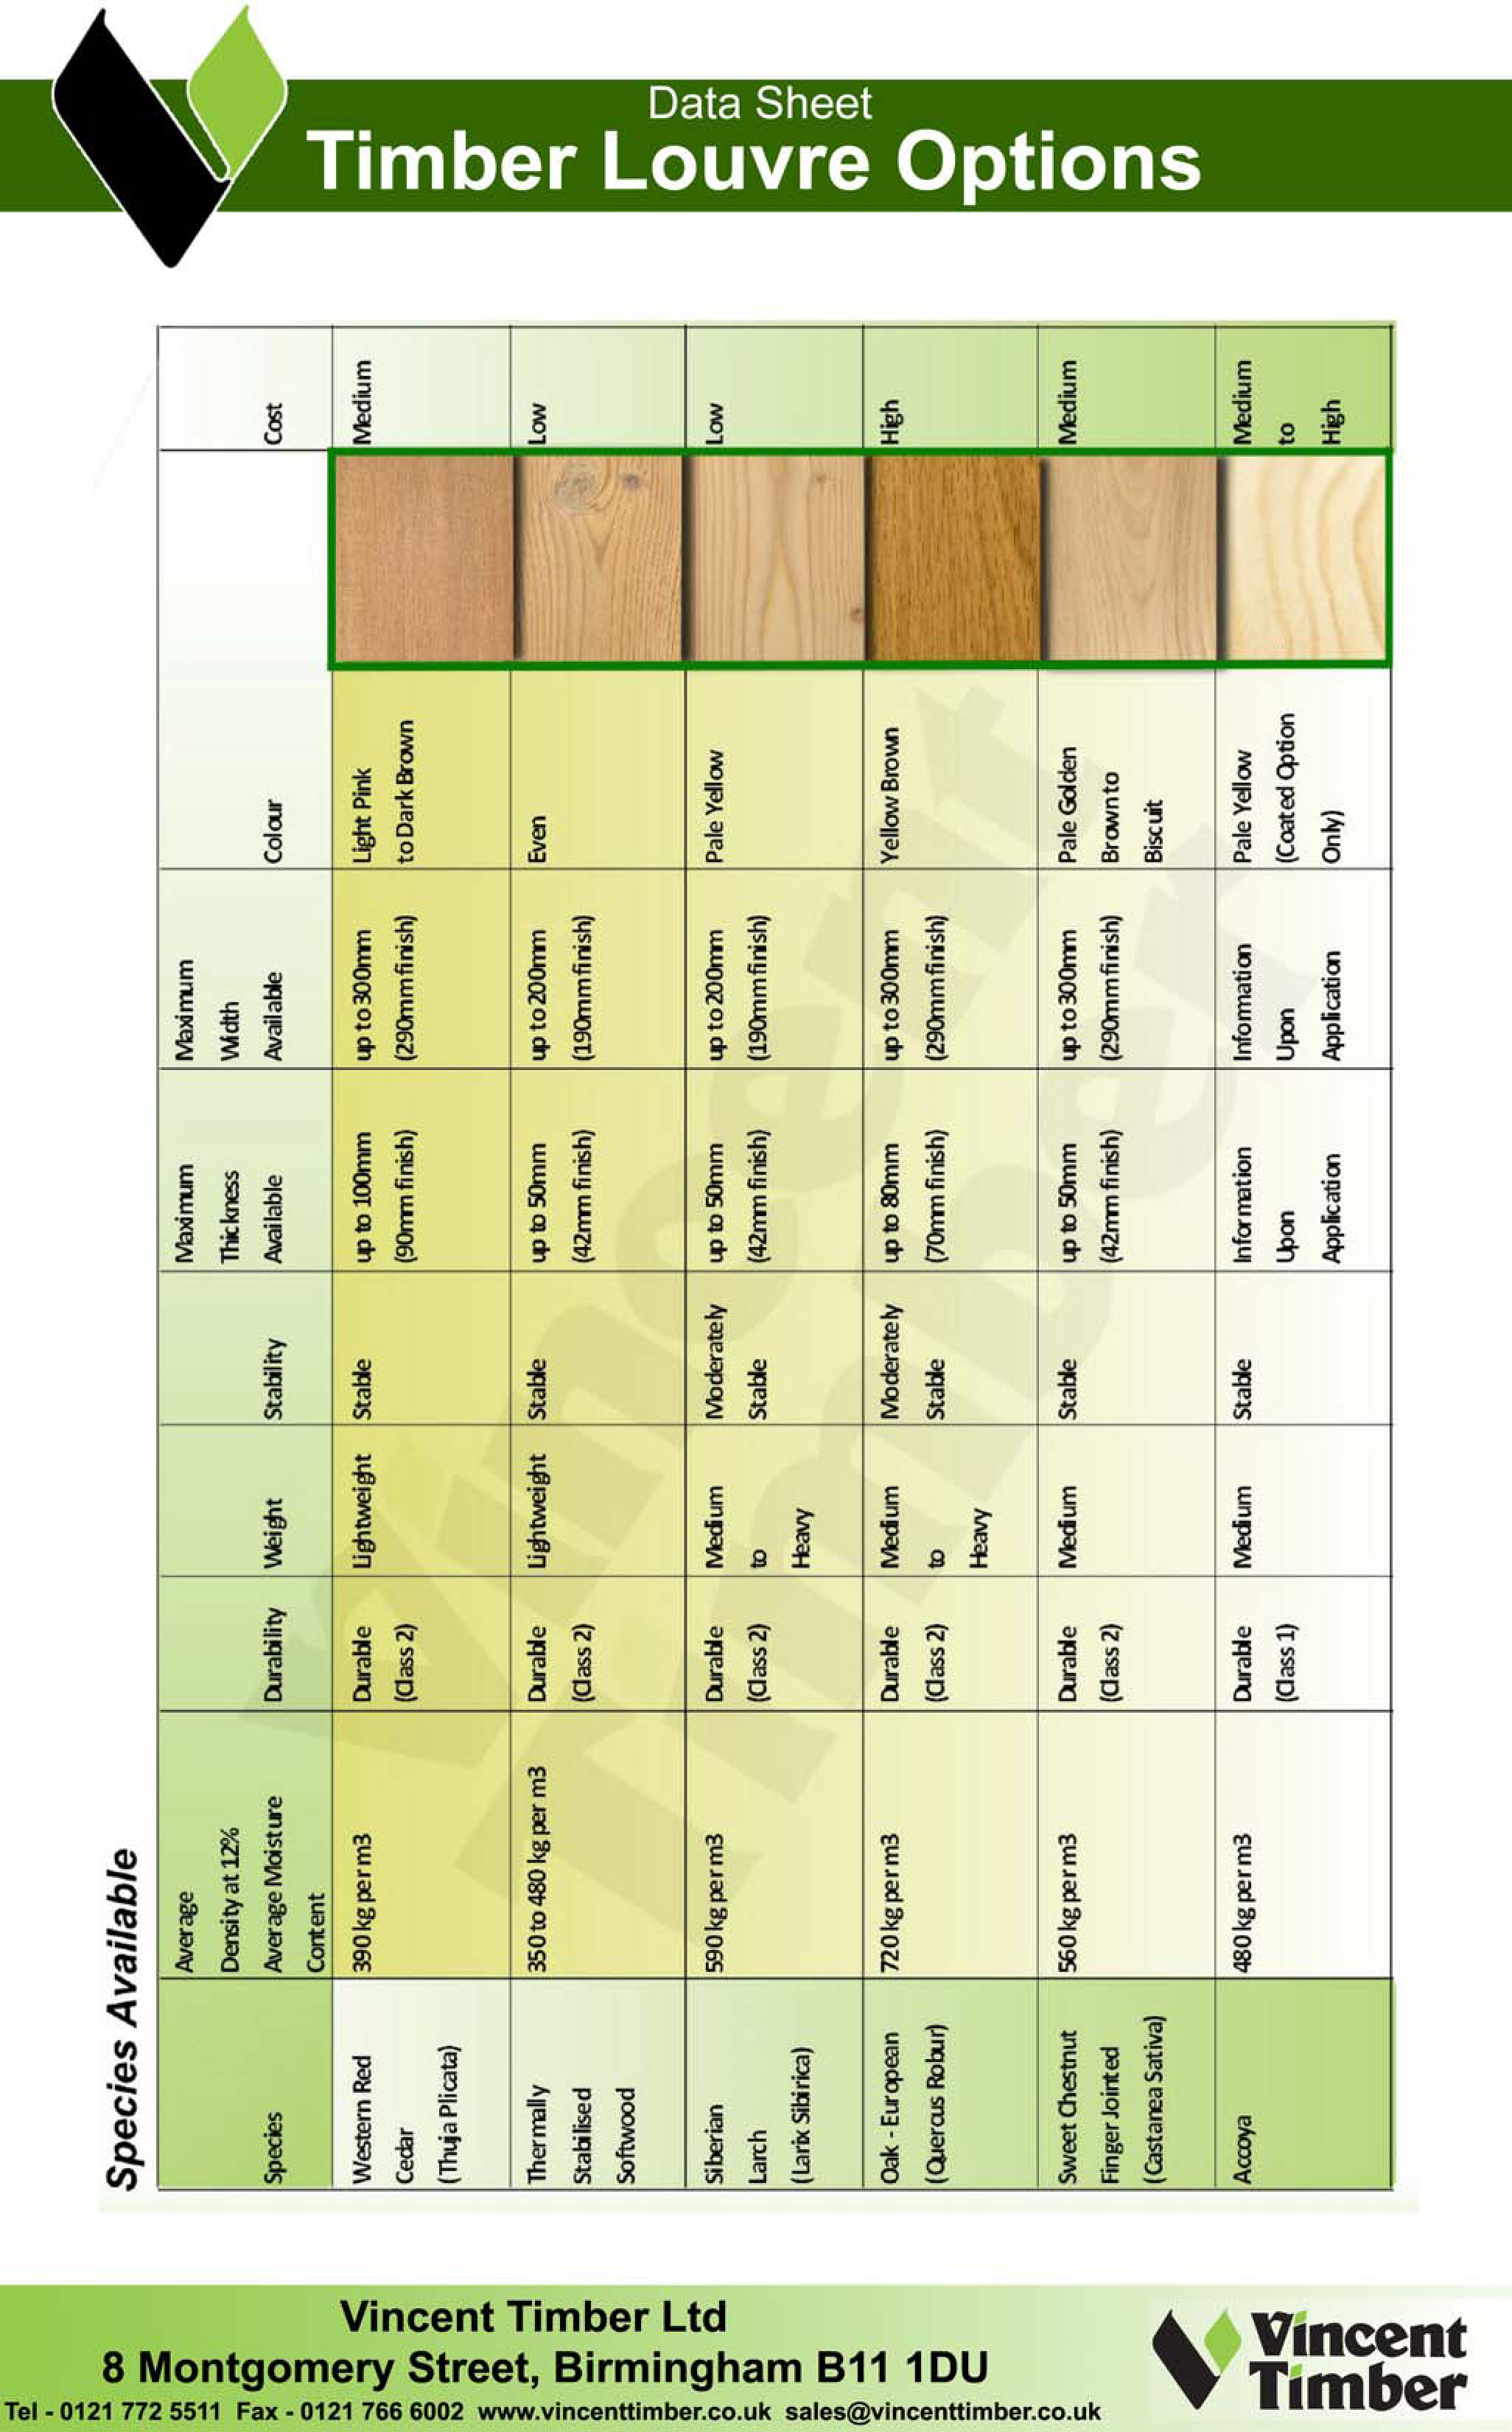 Data sheet for Timber Louvres